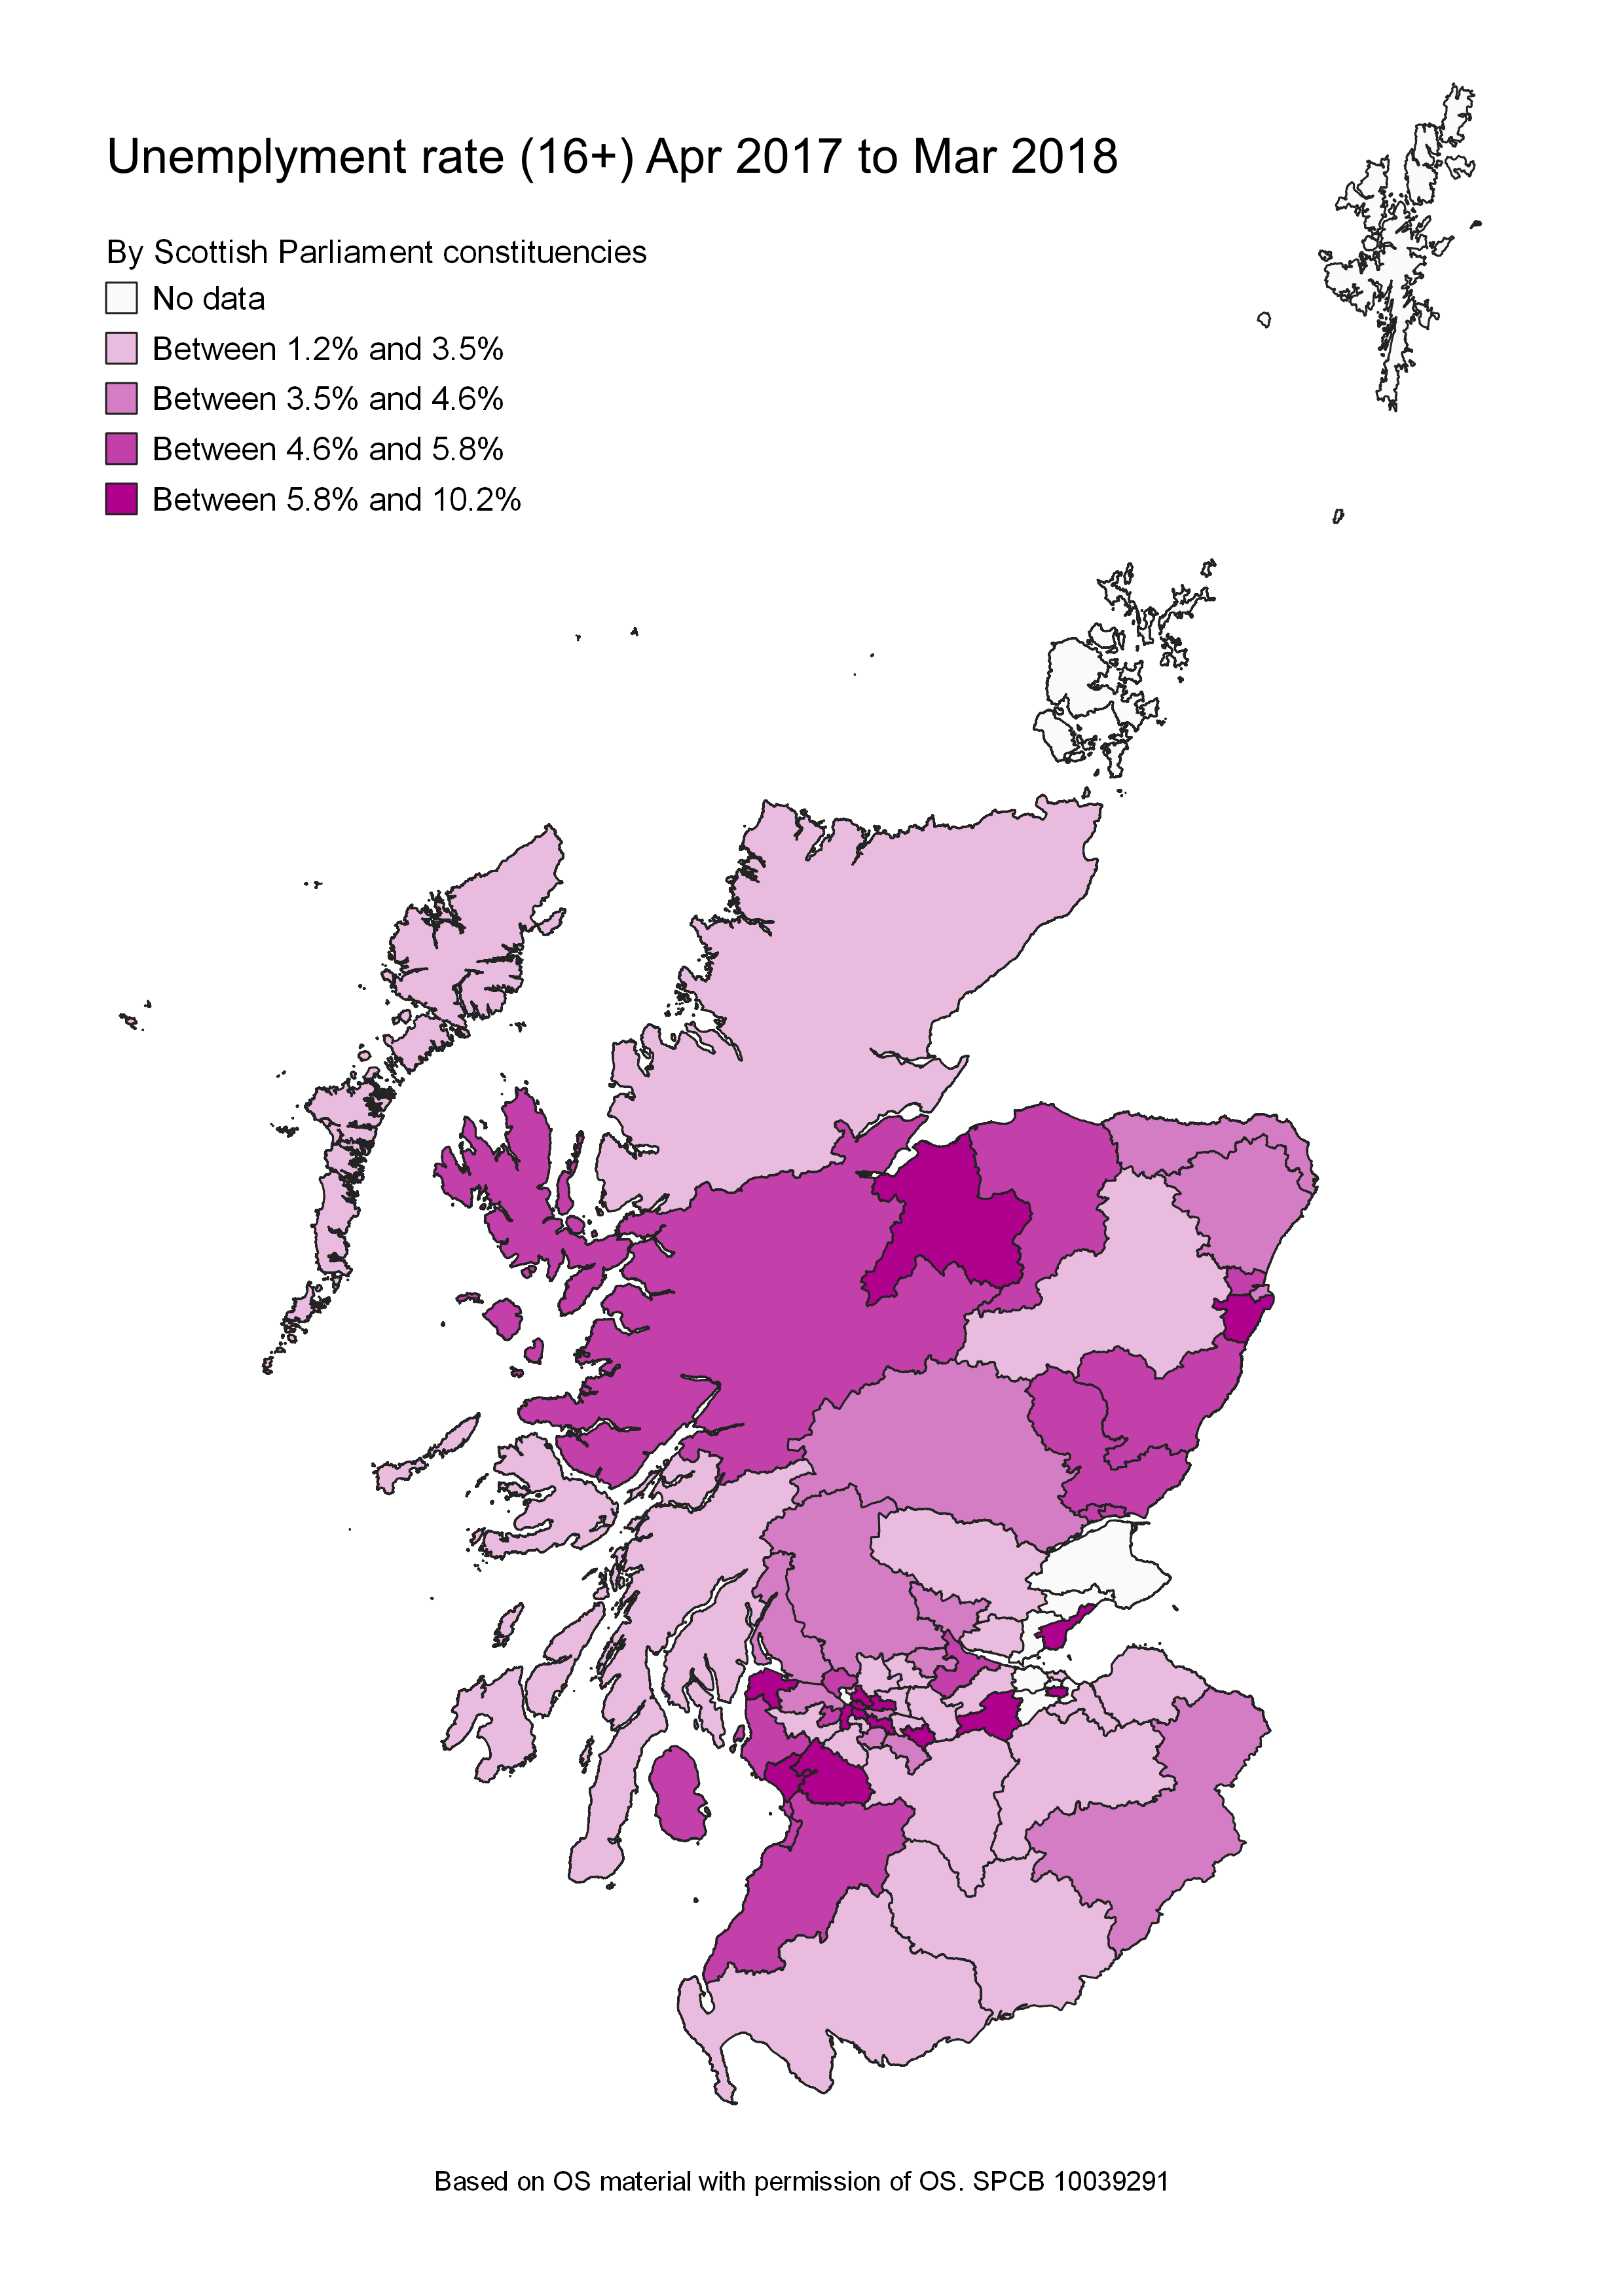 The unemployment rate for people aged 16 and over for each Scottish Parliamentary constituency.